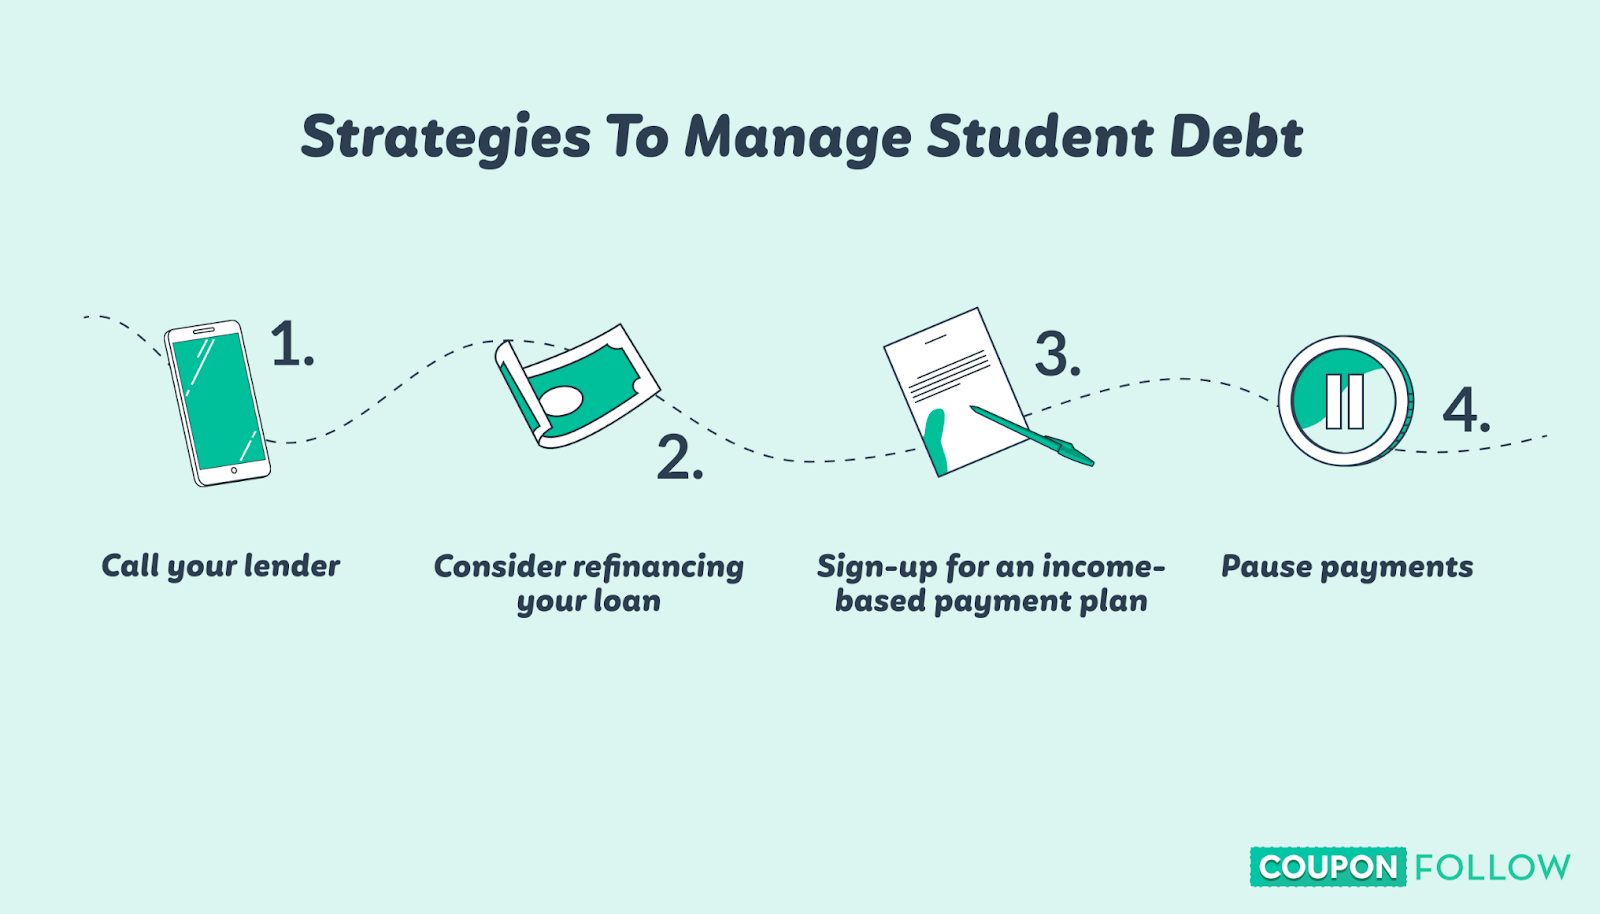 Graphic showing strategies to manage student debt